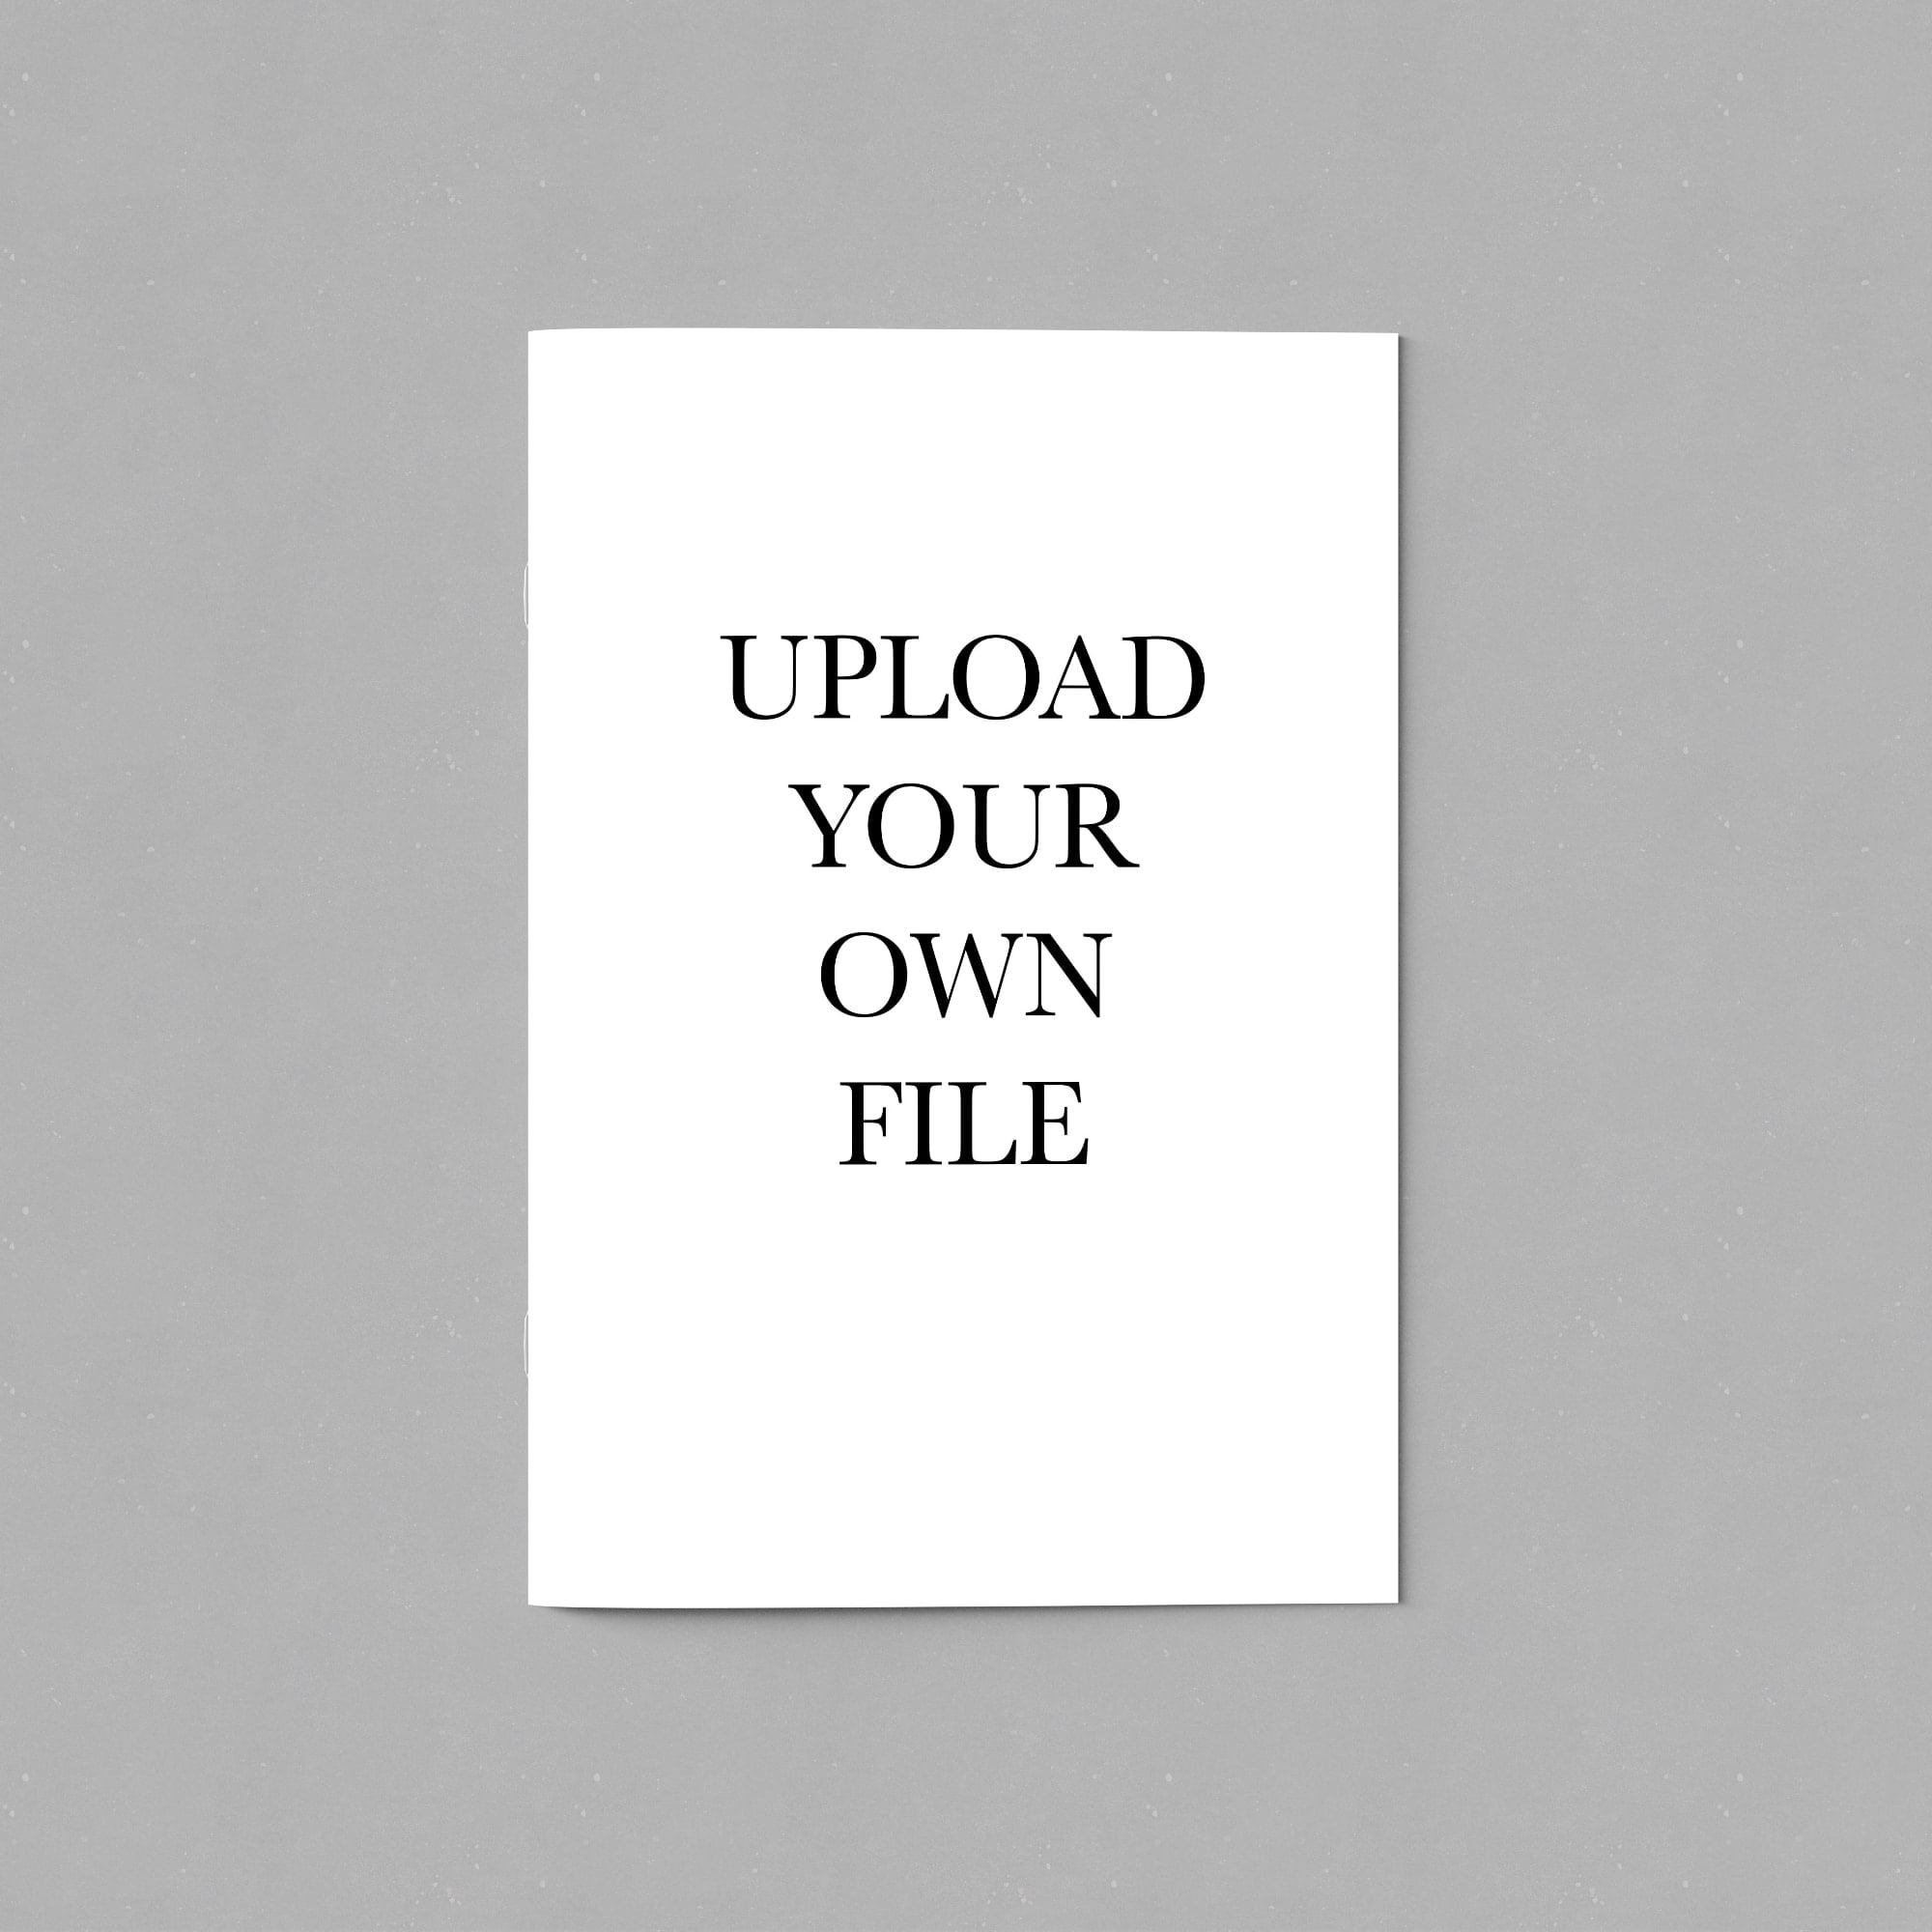 upload your own file